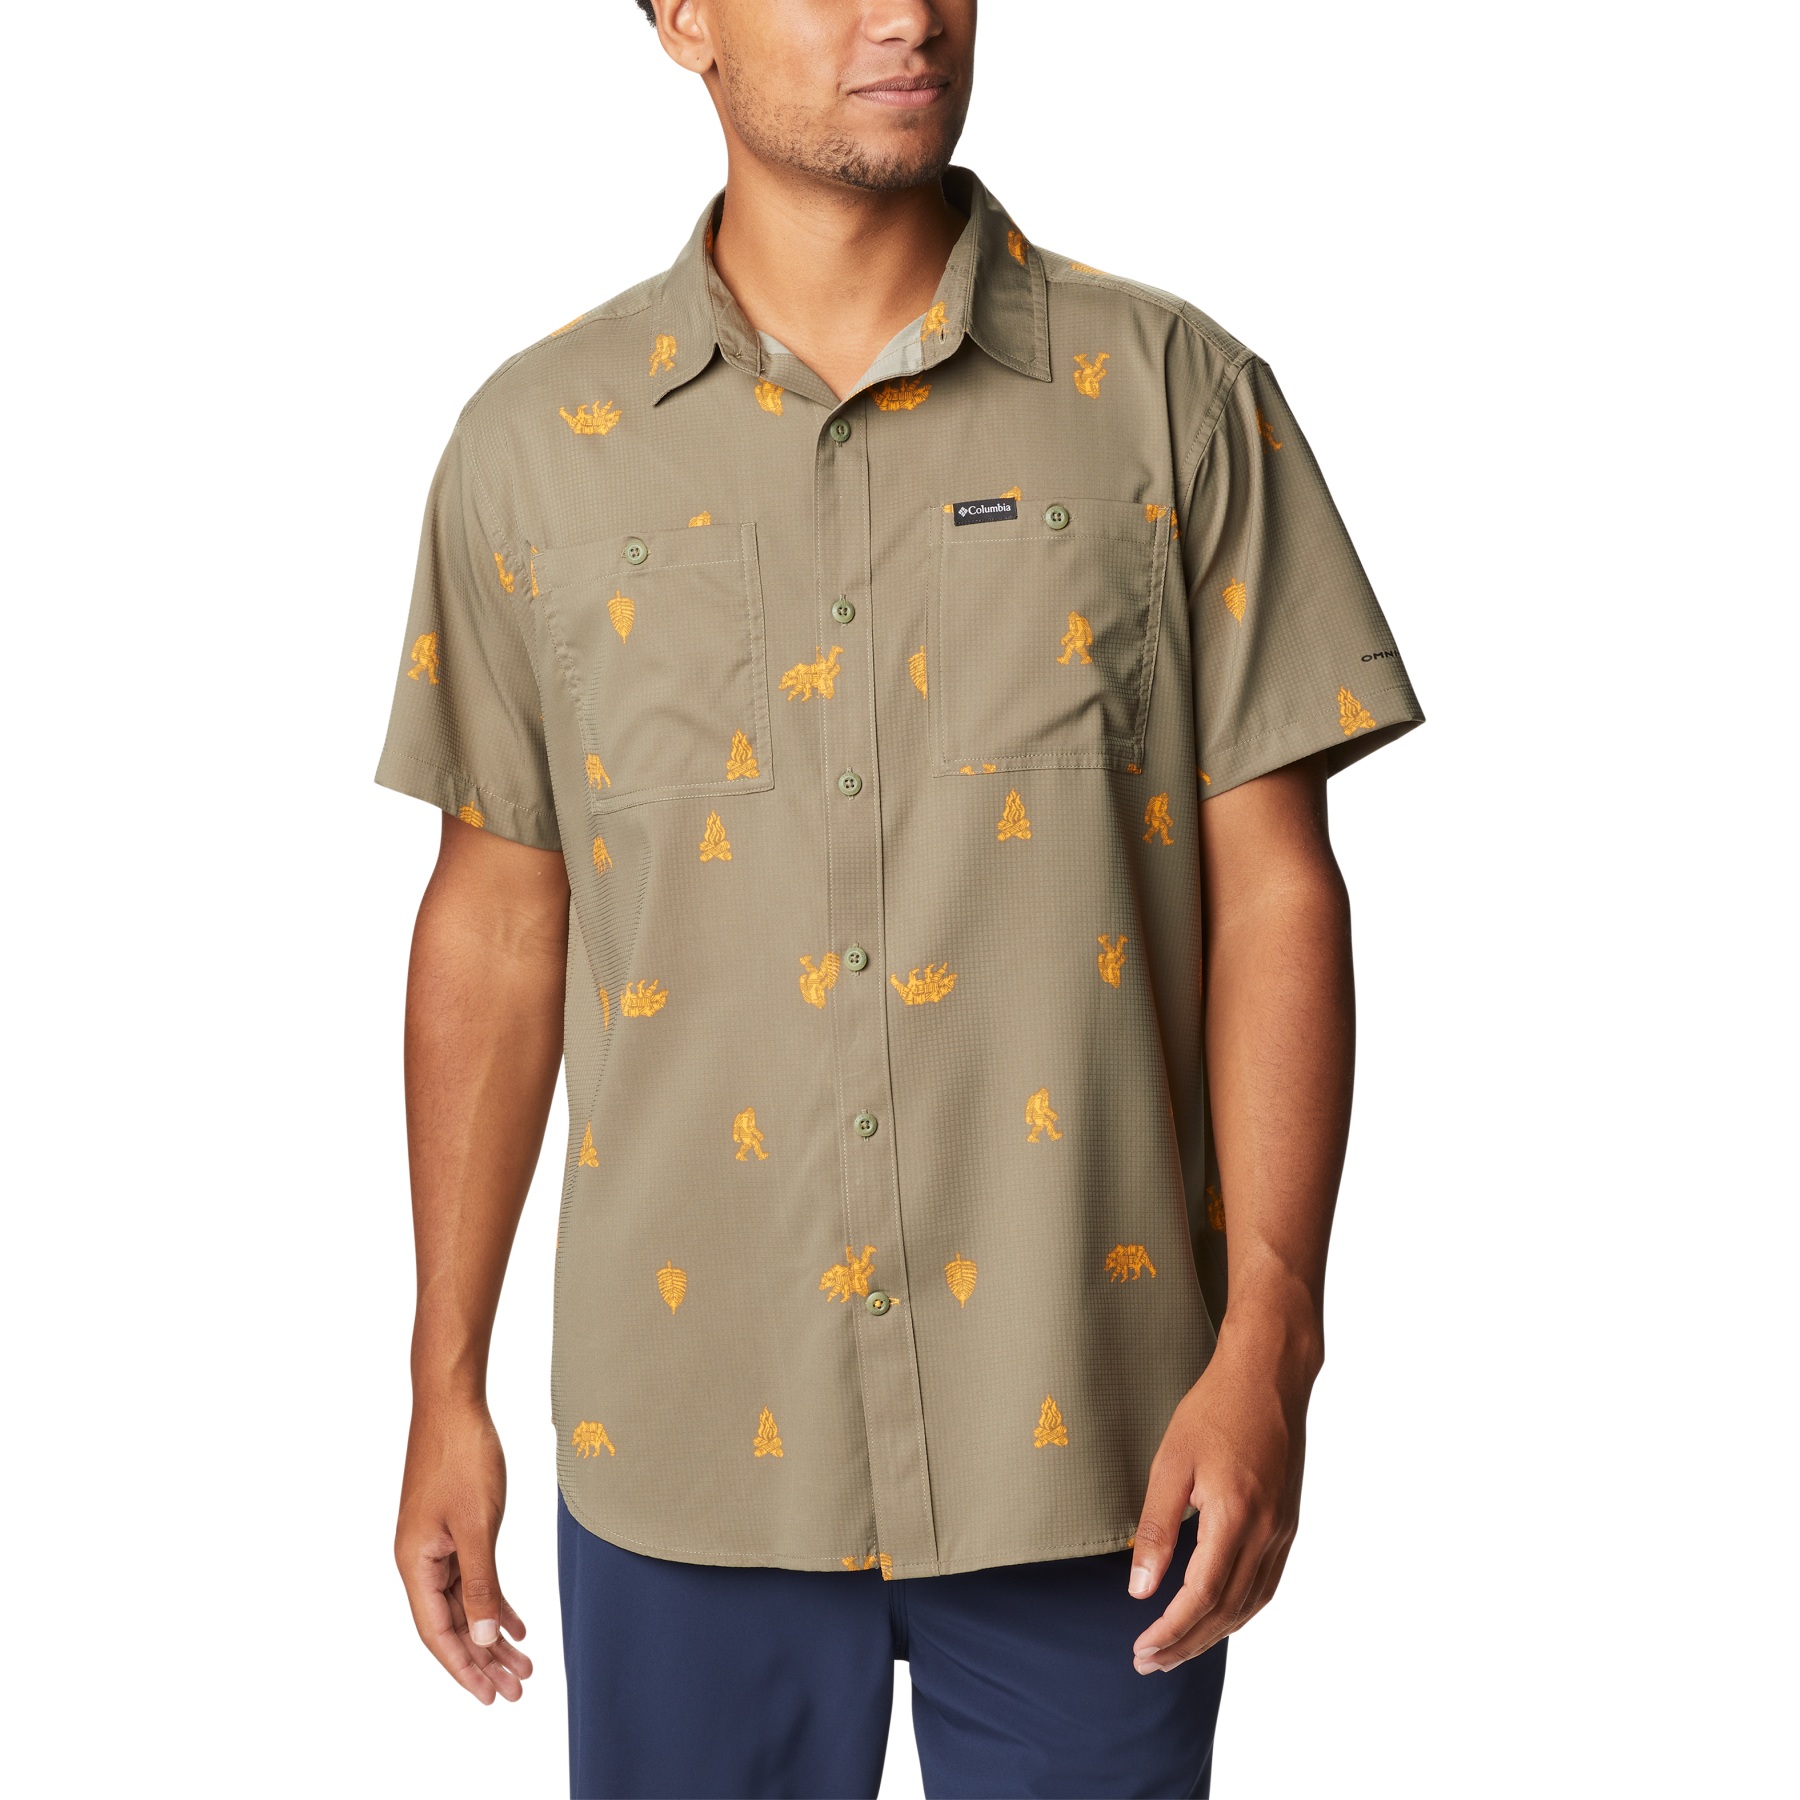 Image of Columbia Utilizer Printed Woven Short Sleeve Shirt - Stone Green Camp Social